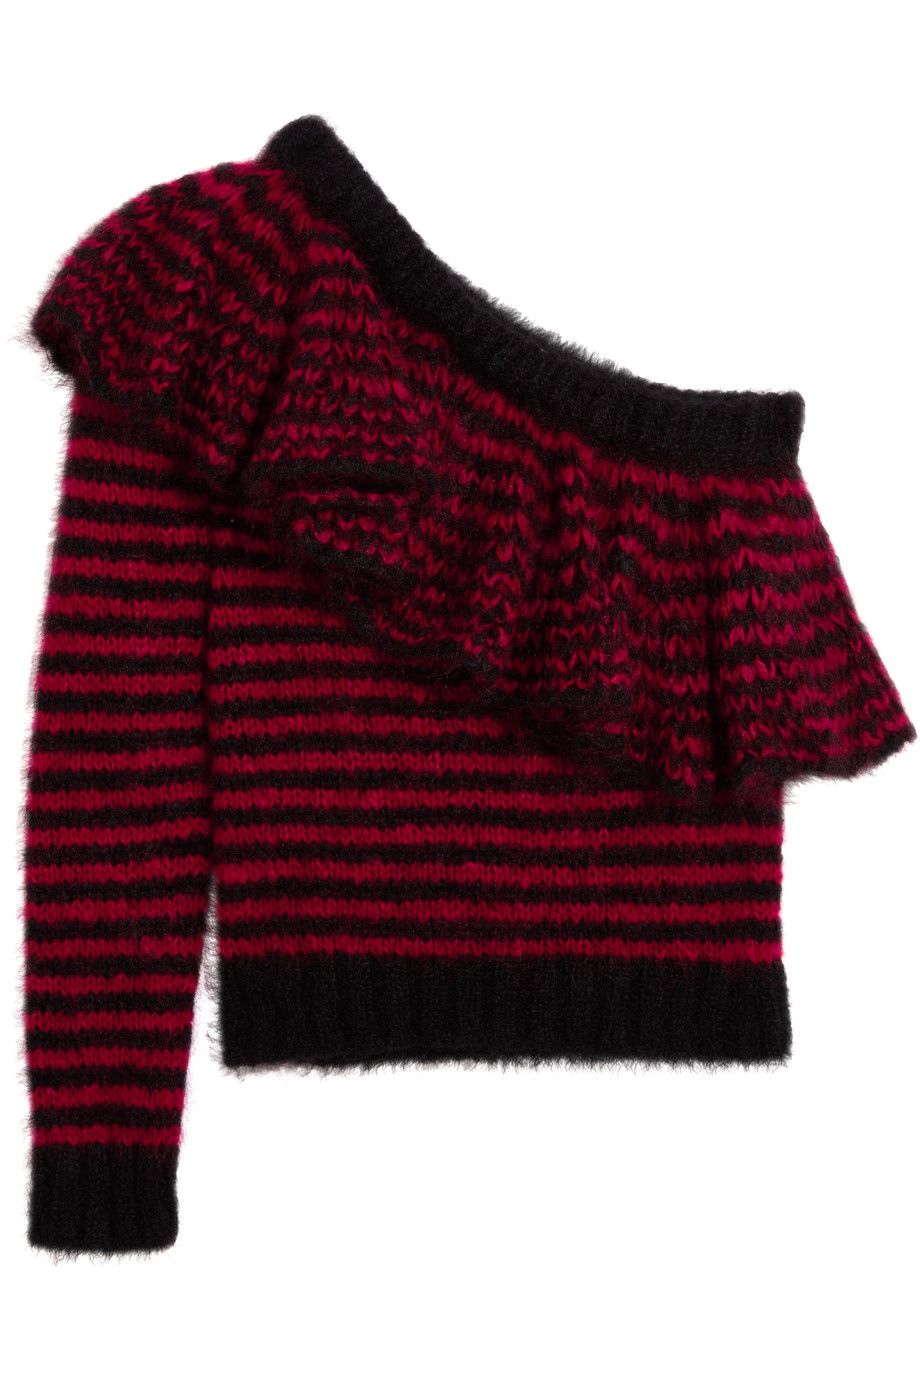 Product, Sweater, Sleeve, Textile, Red, Pattern, Wool, Woolen, Knitting, Maroon, 